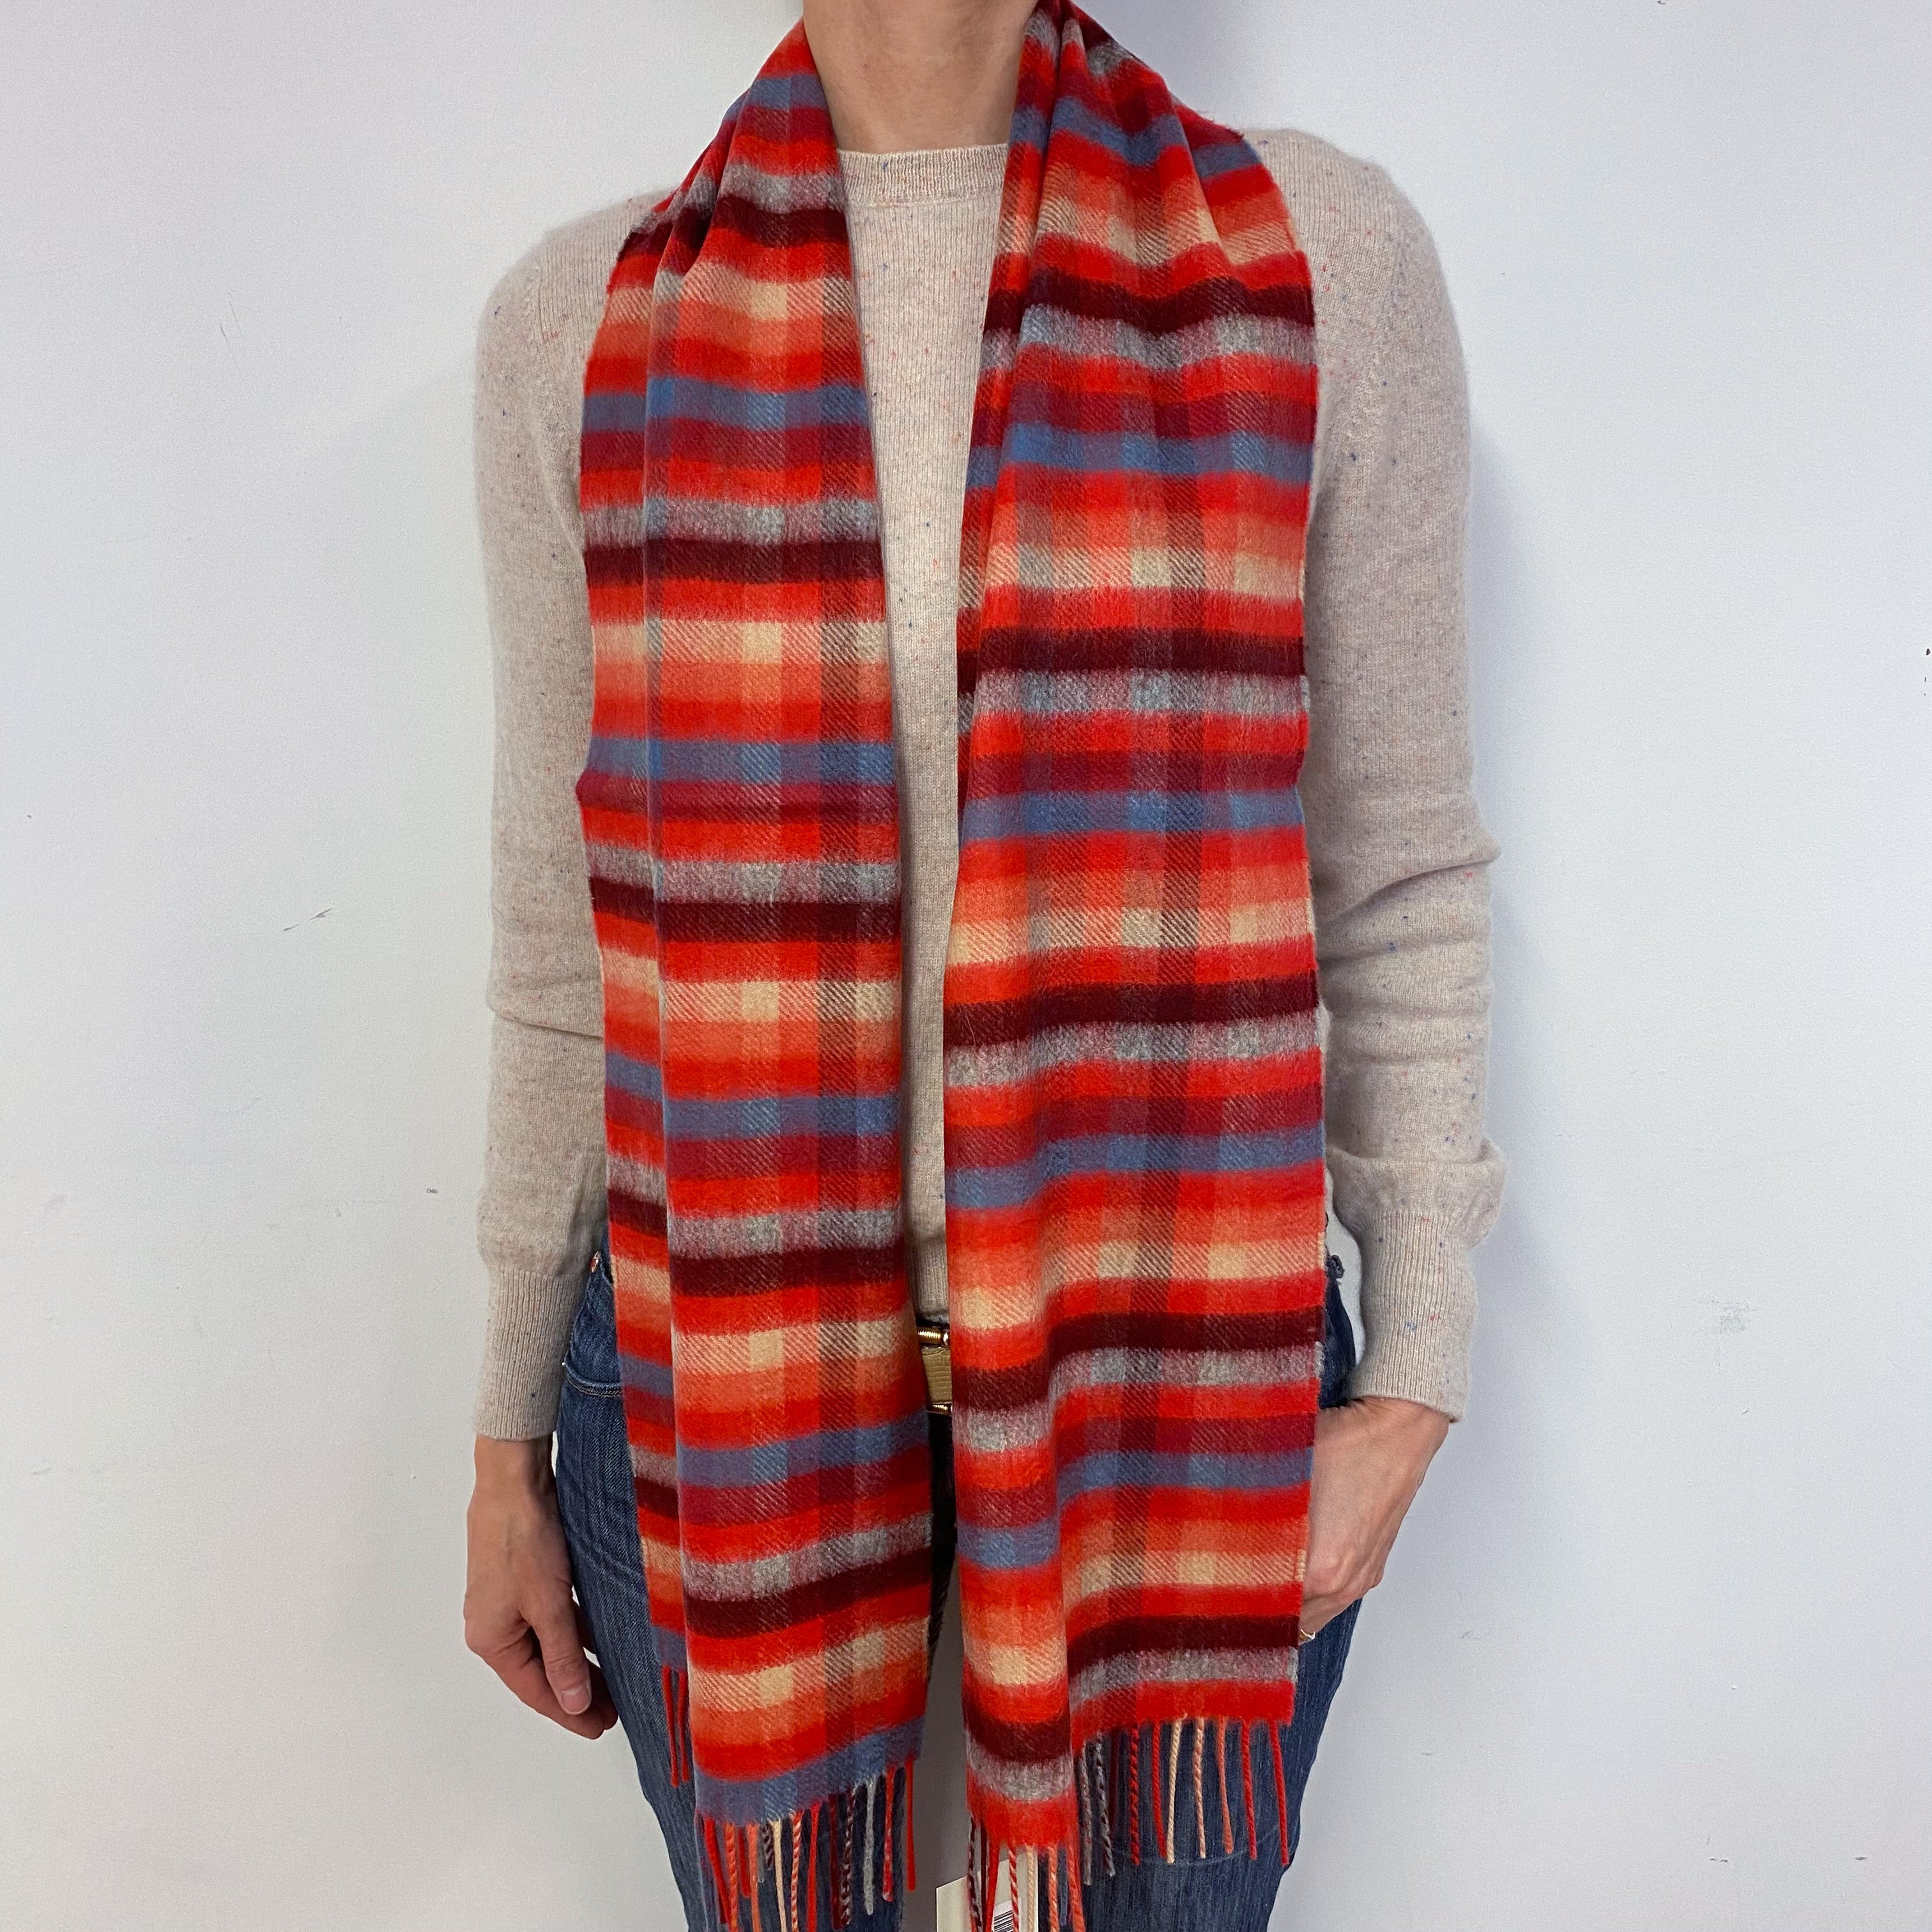 Brand New Scottish Woven Cashmere Scarf Scarlet Check